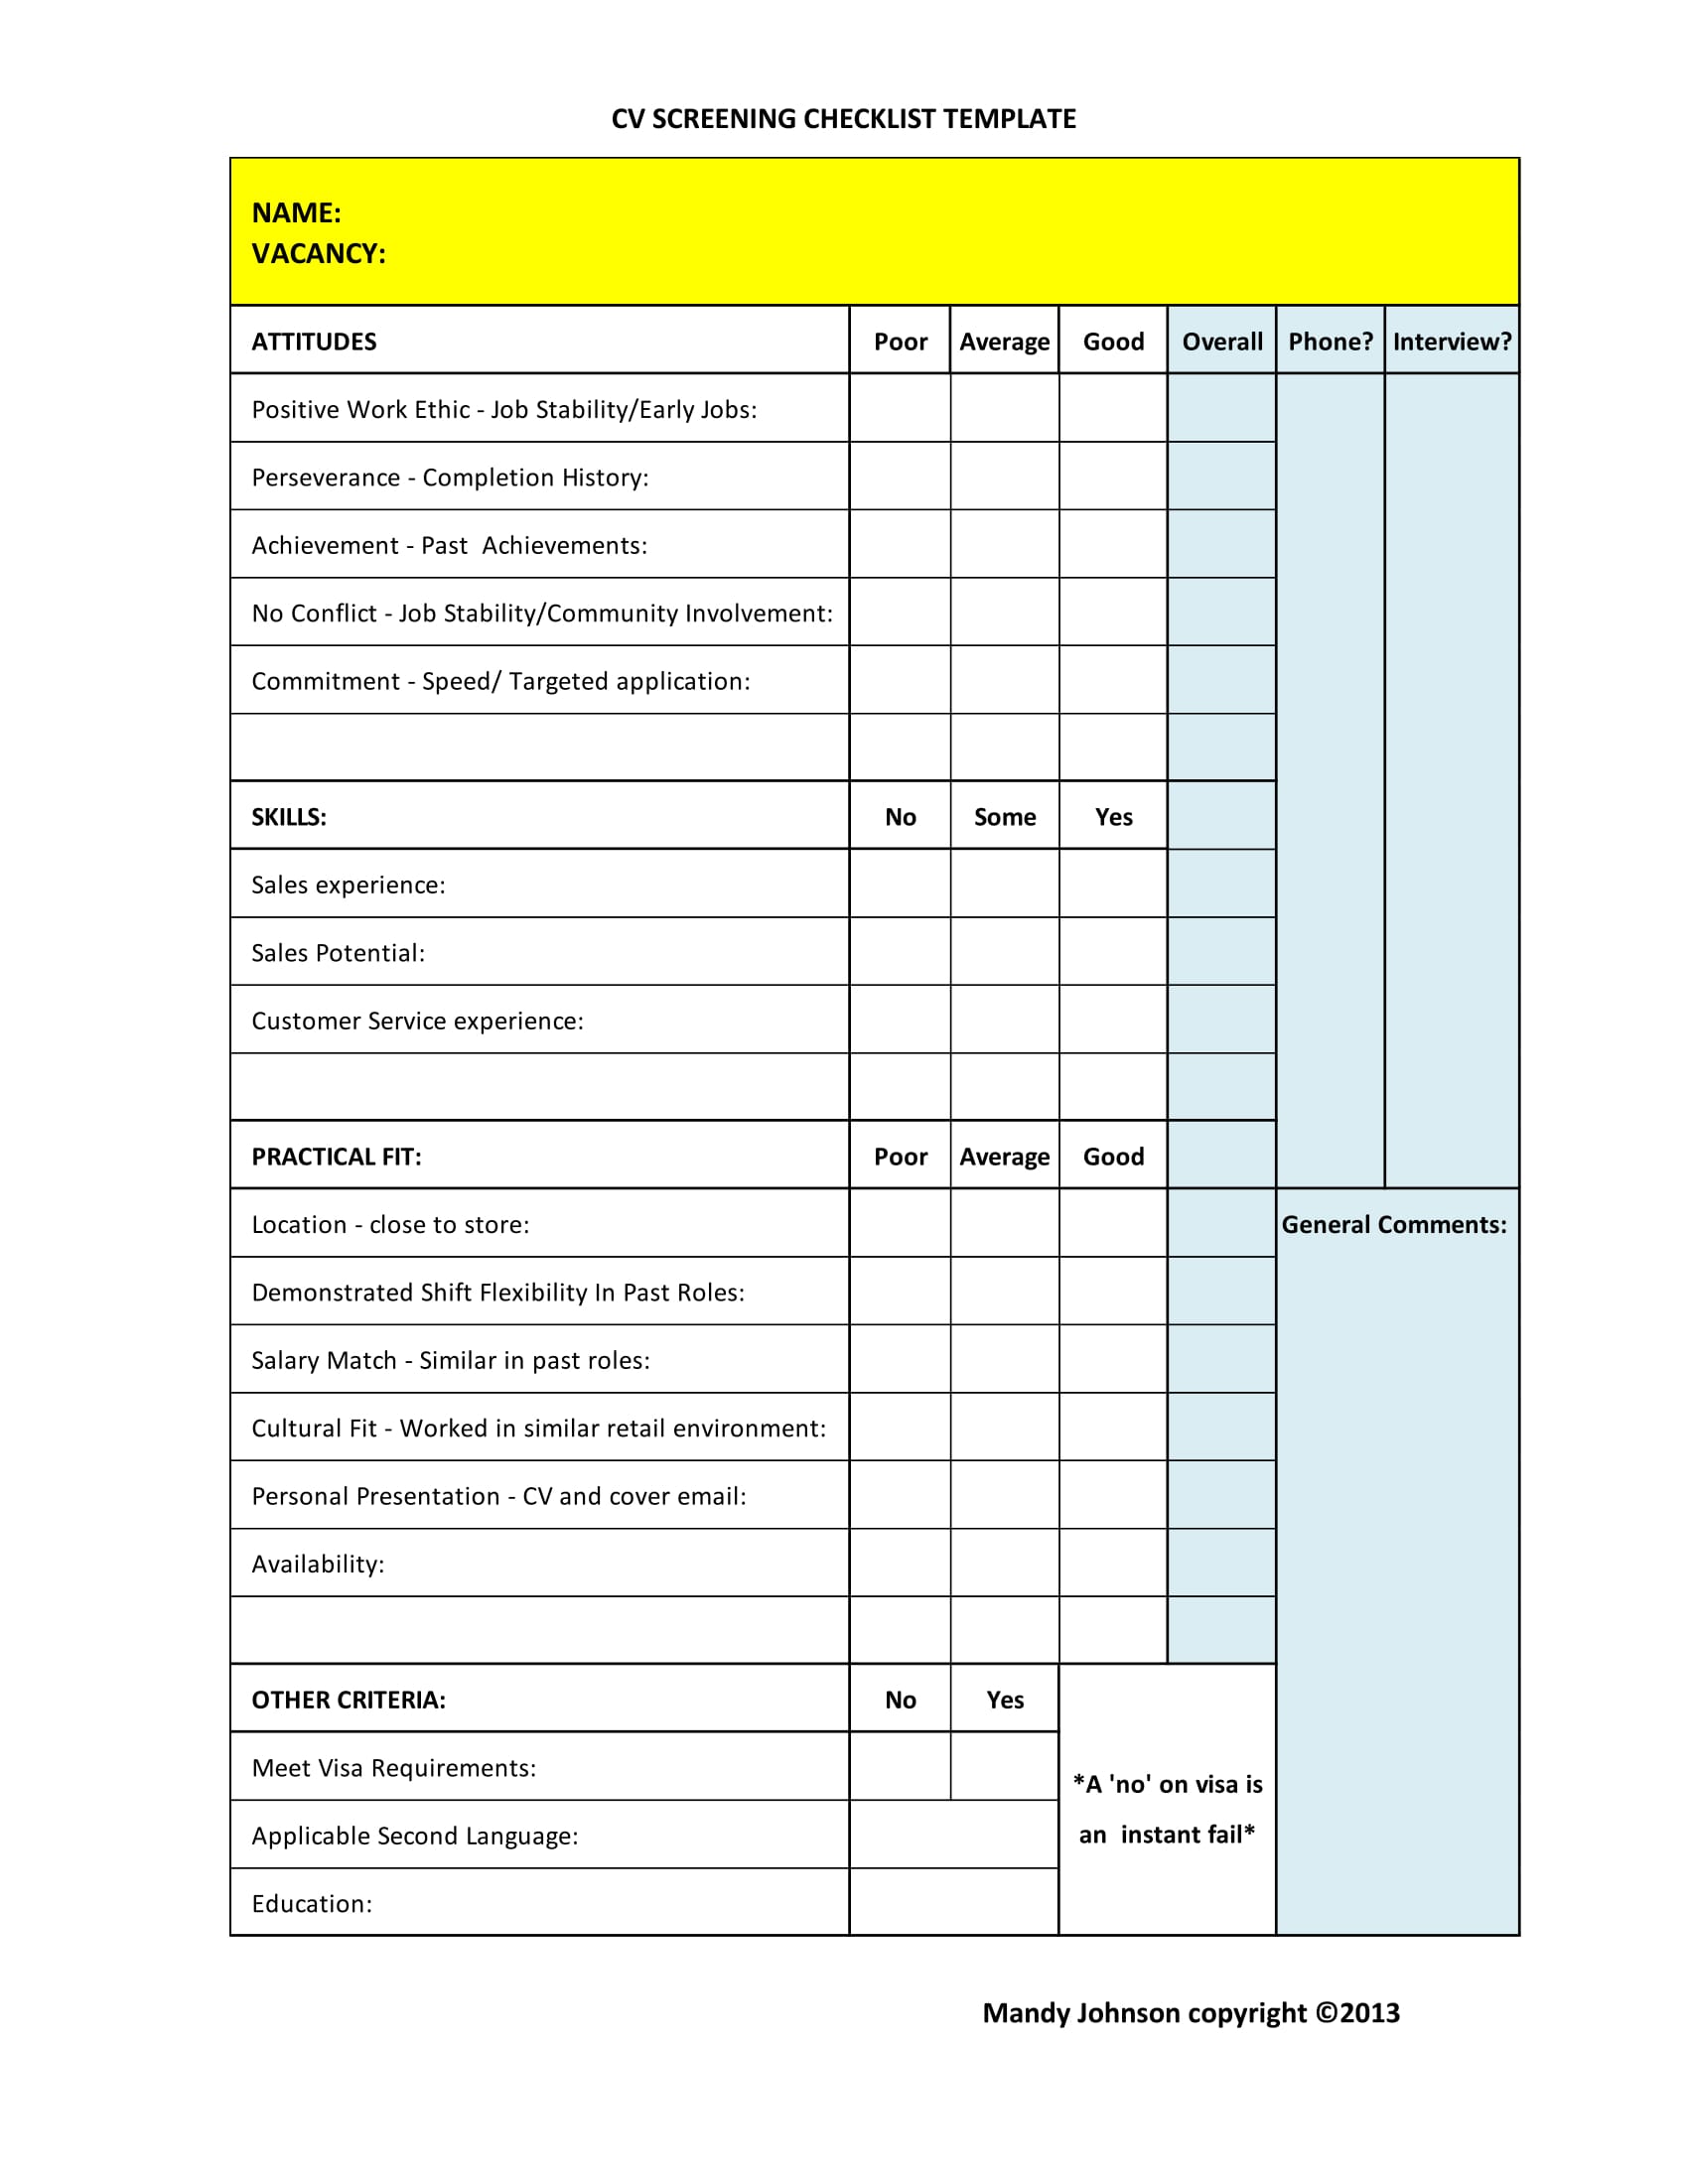 14  resume evaluation forms